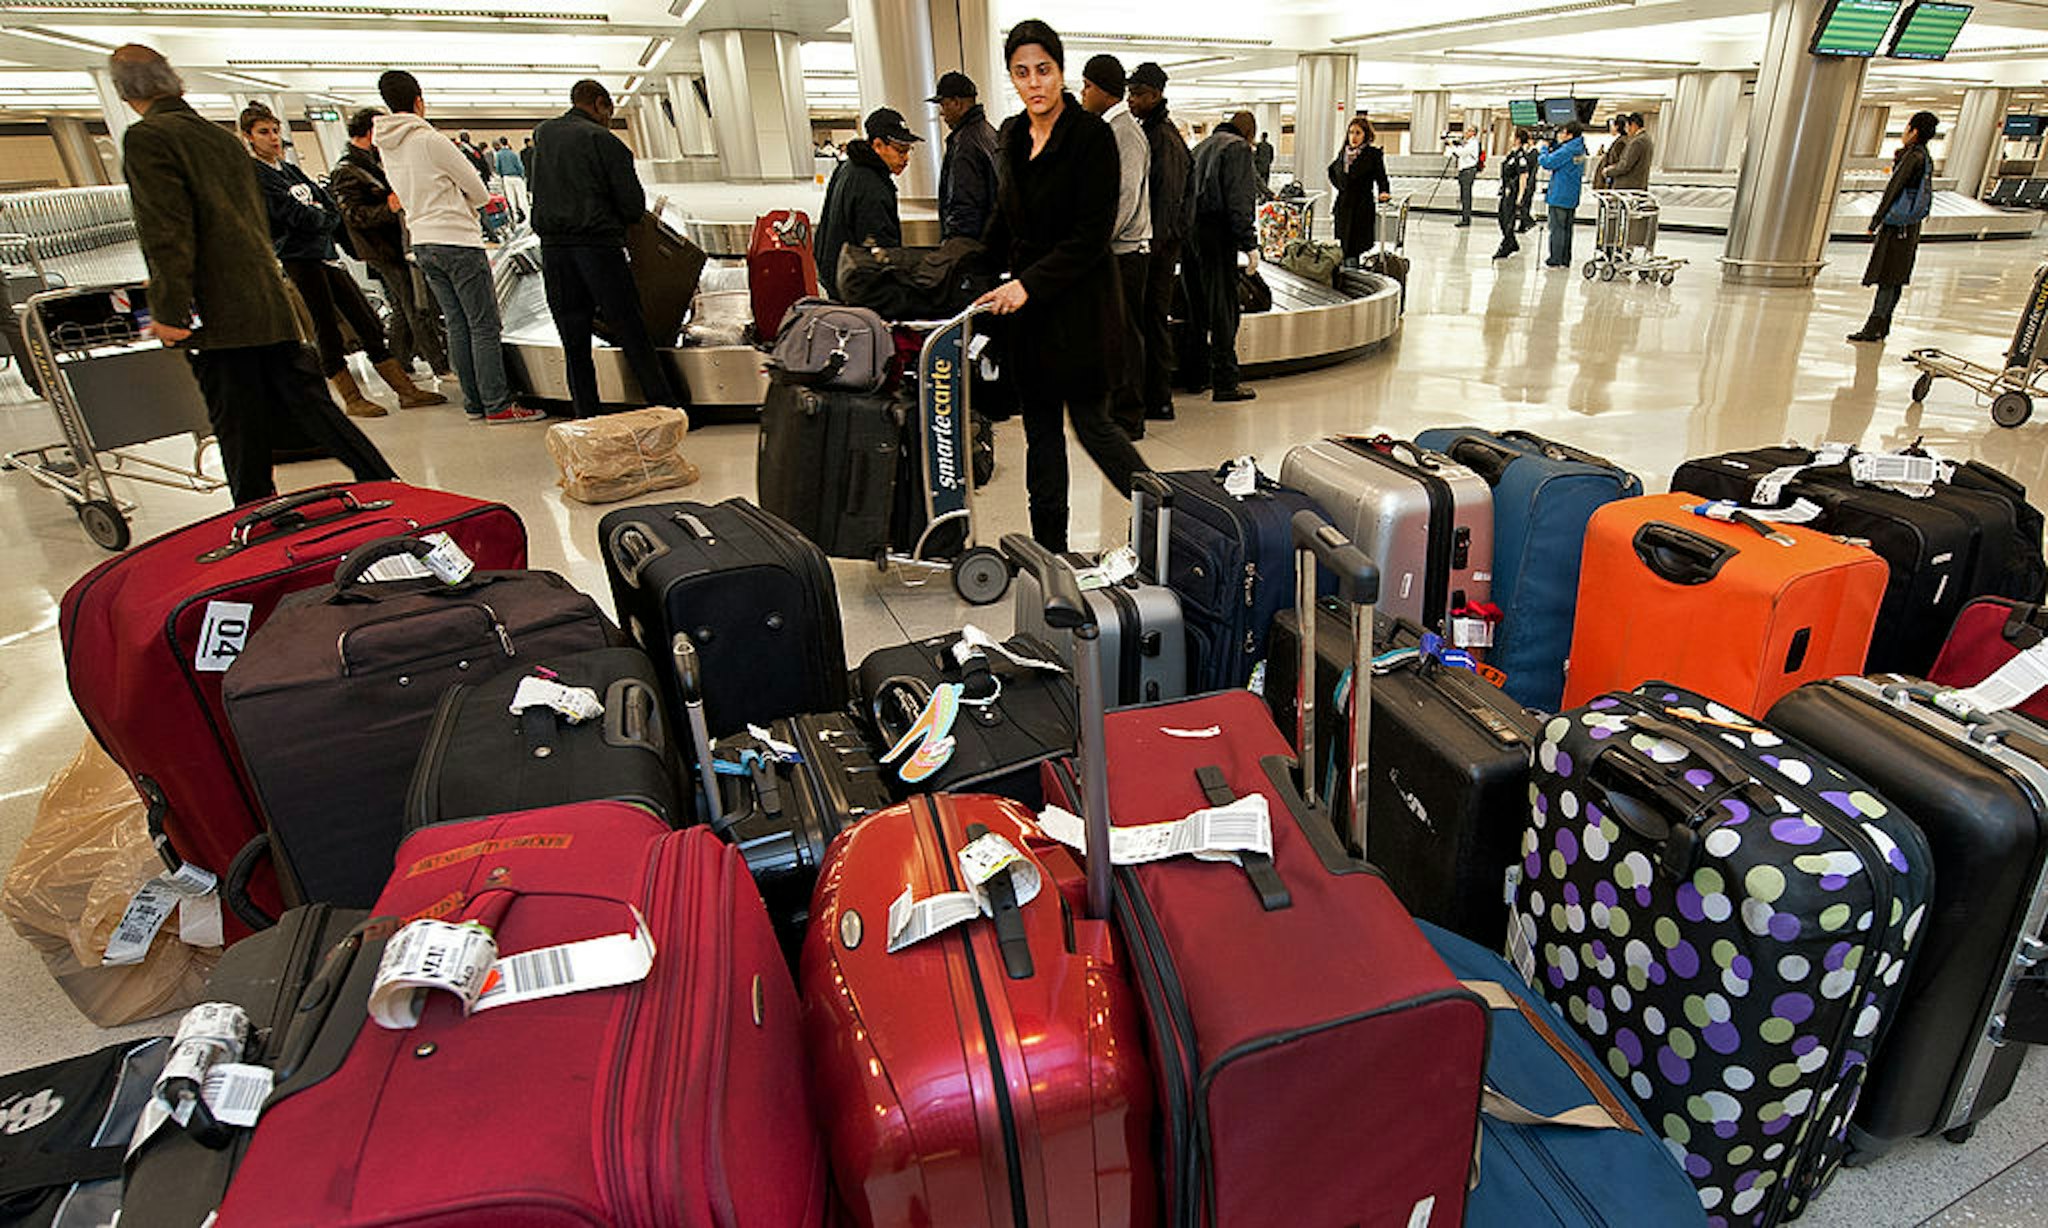 A woman pushes her luggage cart past unclaimed bags inside the US Customs and Border Protection inspection area at Dulles International Airport (IAD), December 21, 2011 in Sterling, Virgina, near Washington, DC.